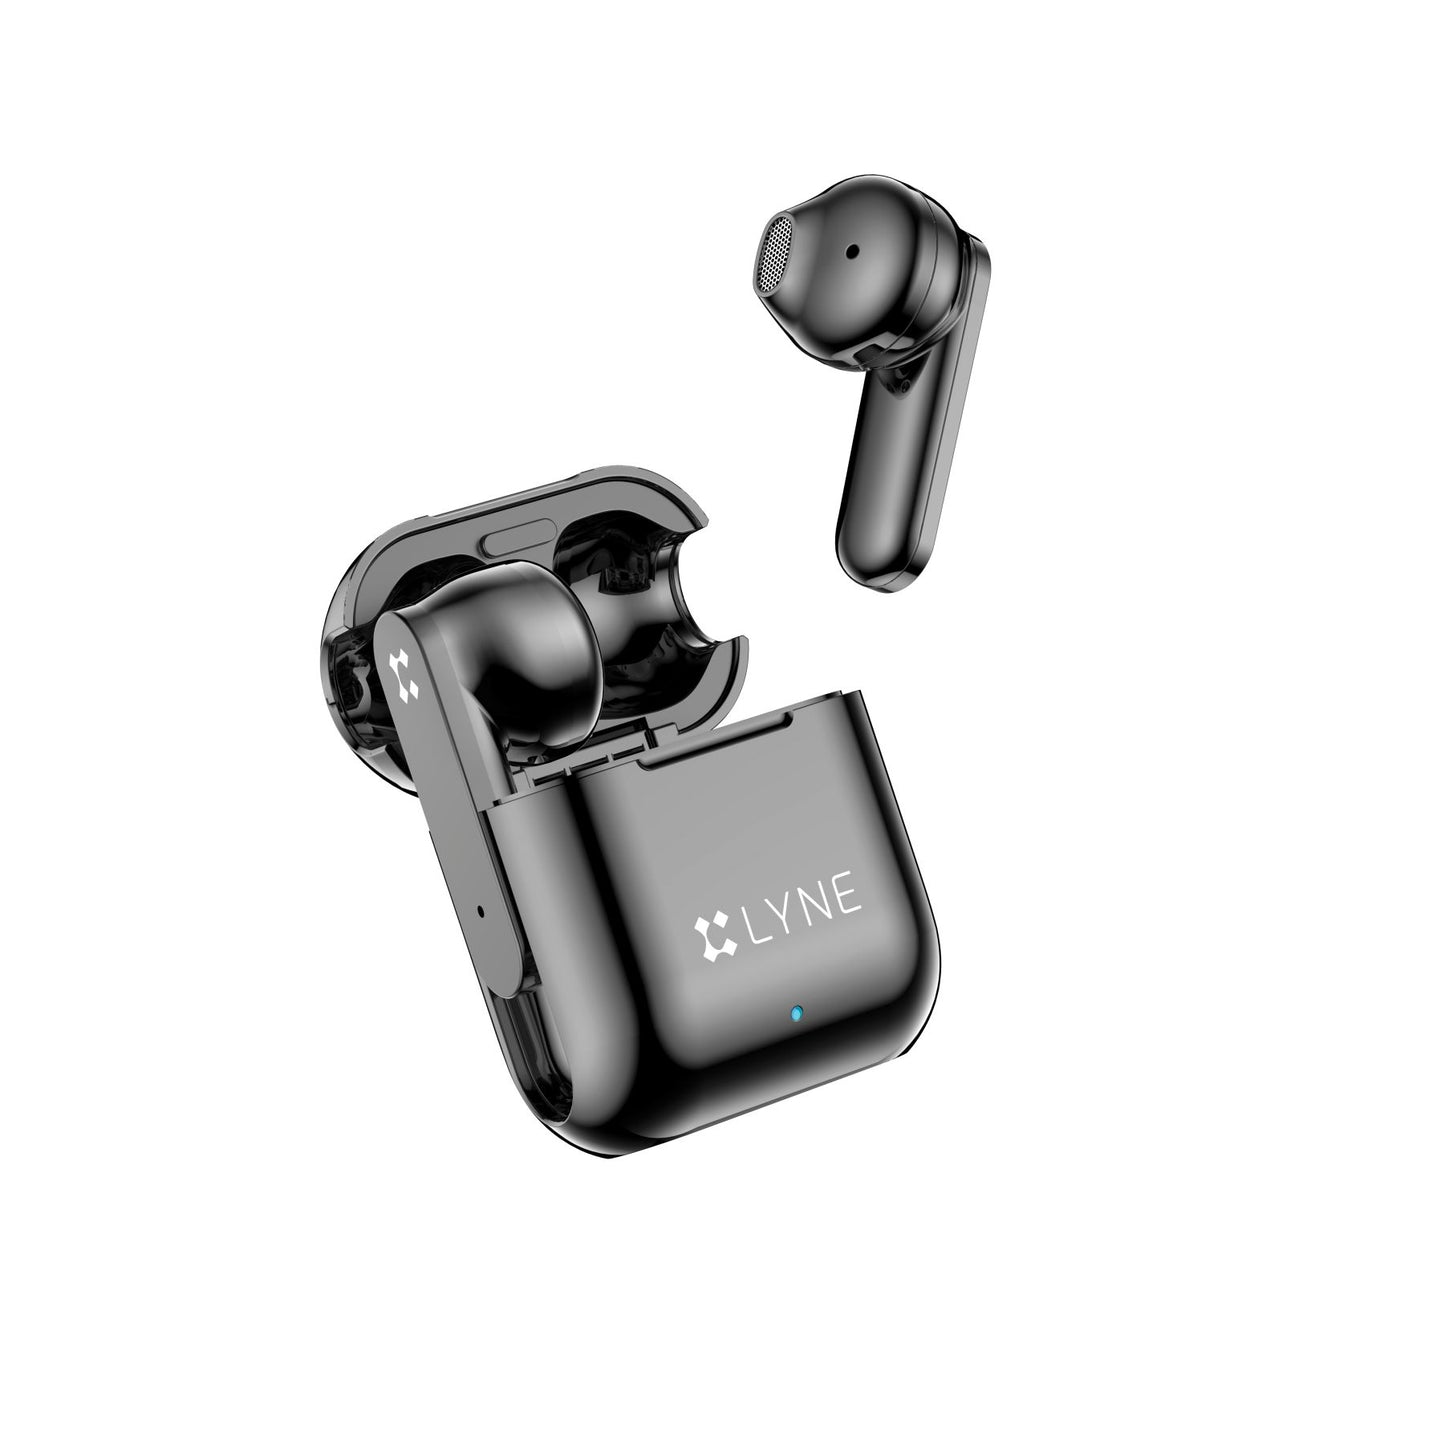 LYNE CoolPods 17 24 Hours Music Time True Wireless Earbuds with Quick Auto Pairing Feature